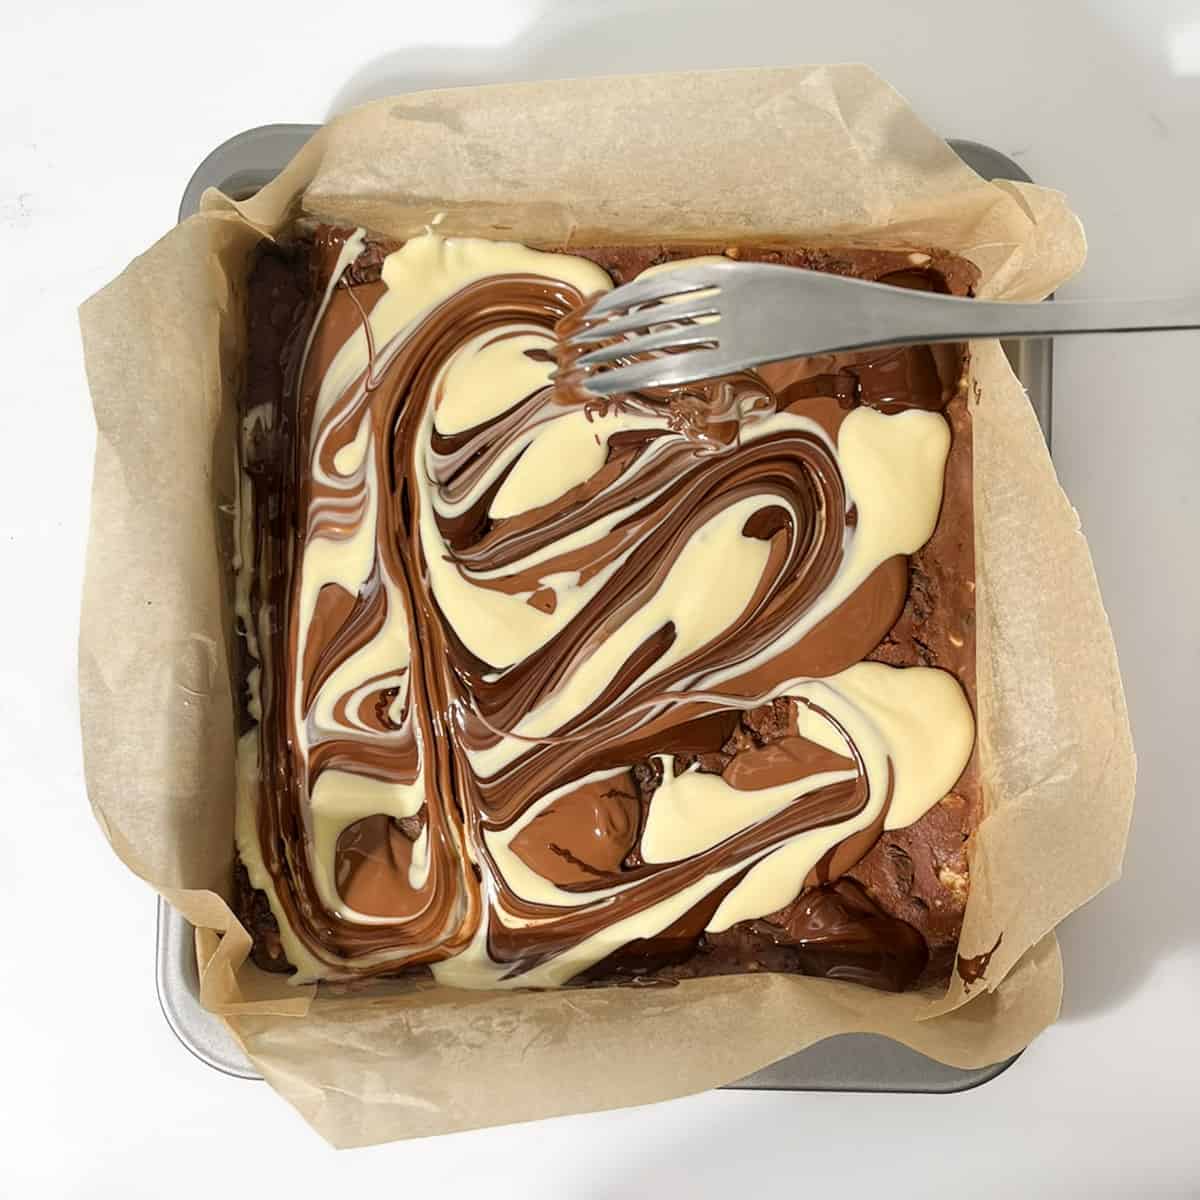 Swirling melted chocolate with a fork.